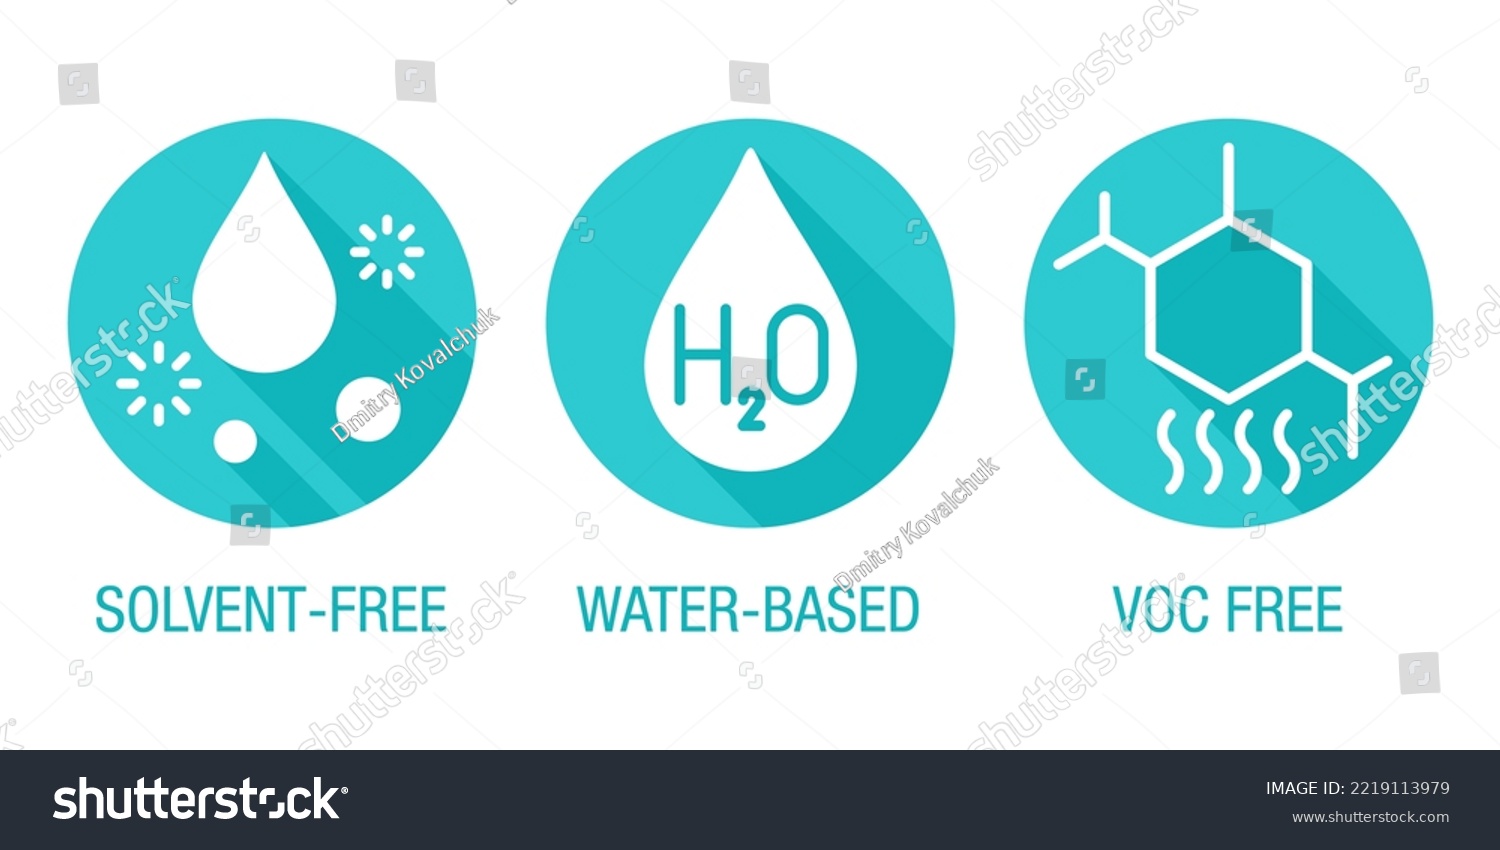 SVG of Solvent free, Water-based, VOC free - flat icons set with long shadows for labeling of cleaning agent or household chemicals svg